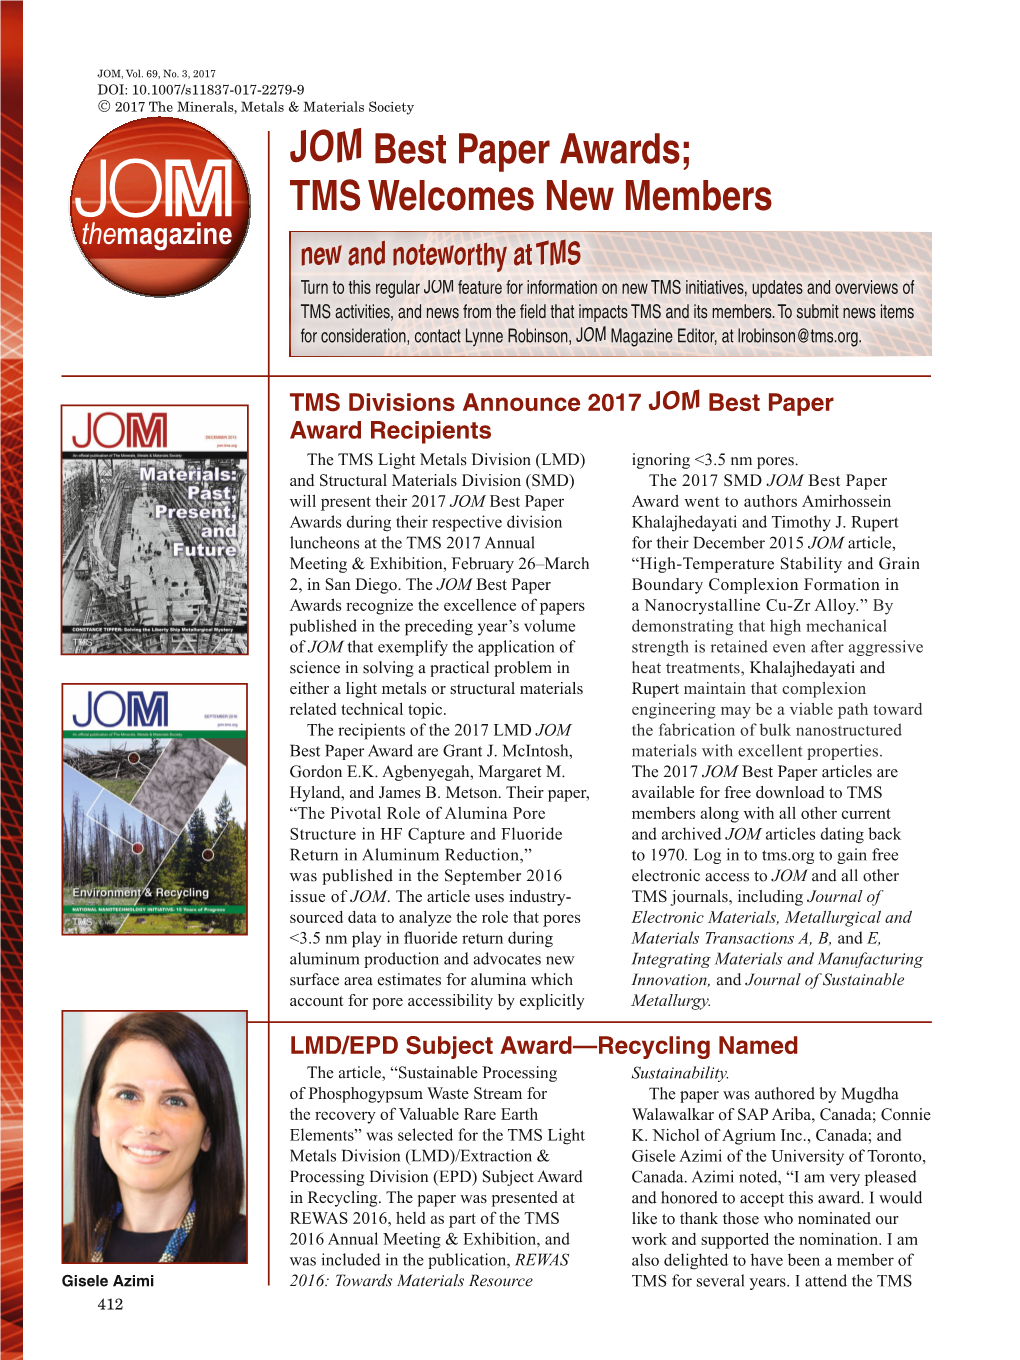 JOM Best Paper Awards; TMS Welcomes New Members